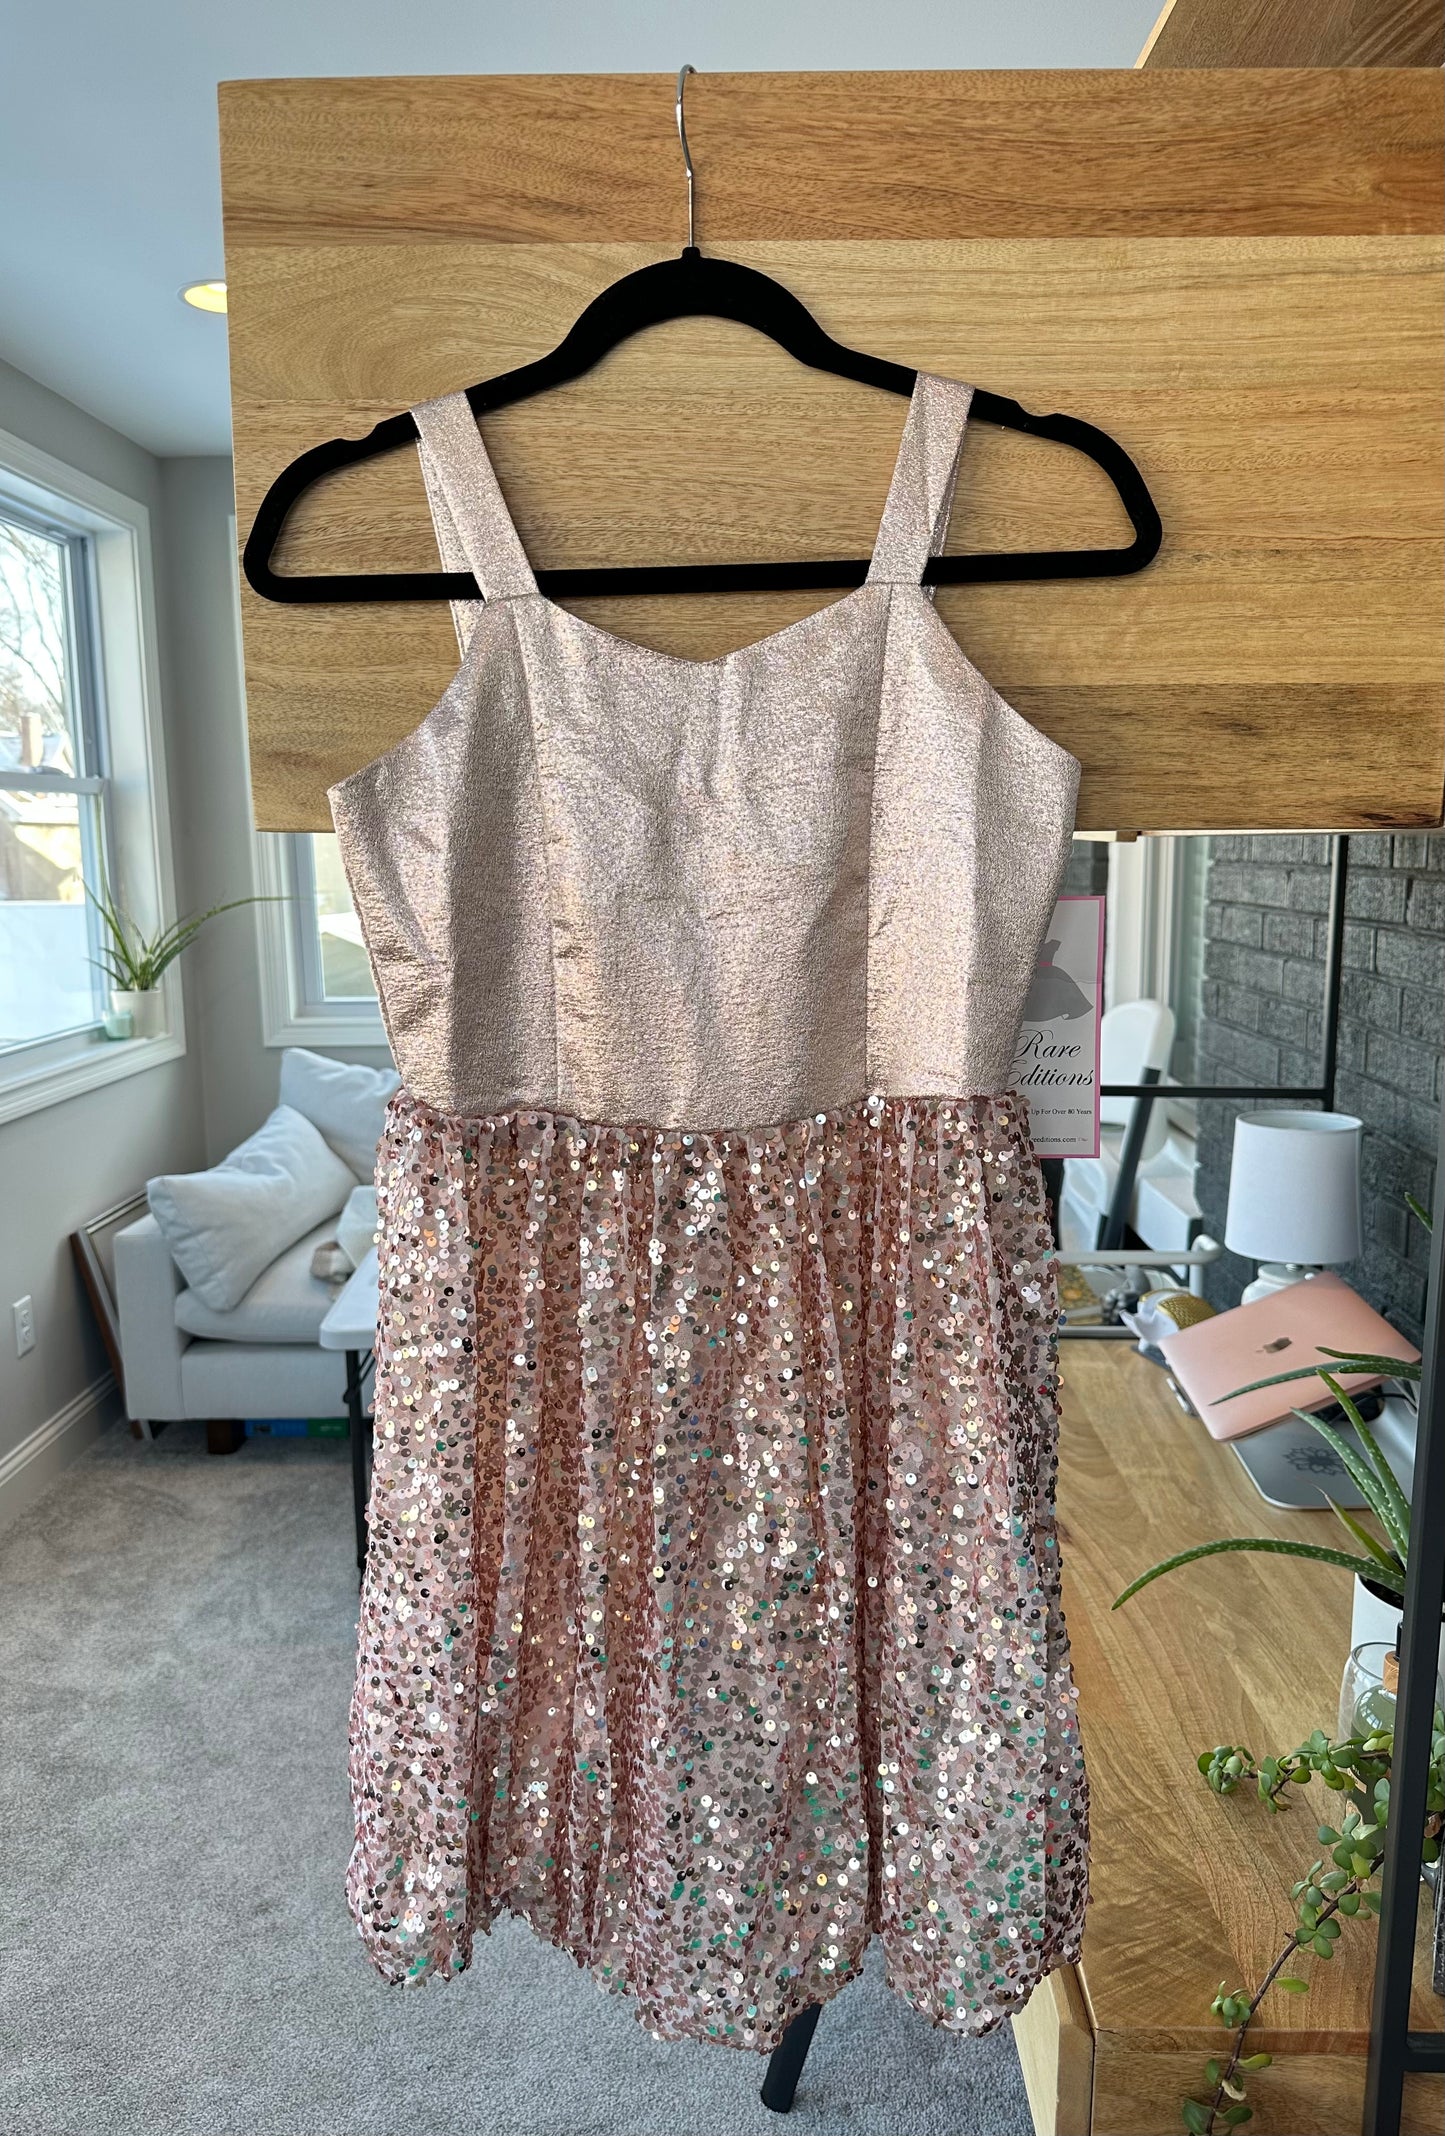 Rose Gold/Blush Dress with Sequins Girls Size 14 - NWT